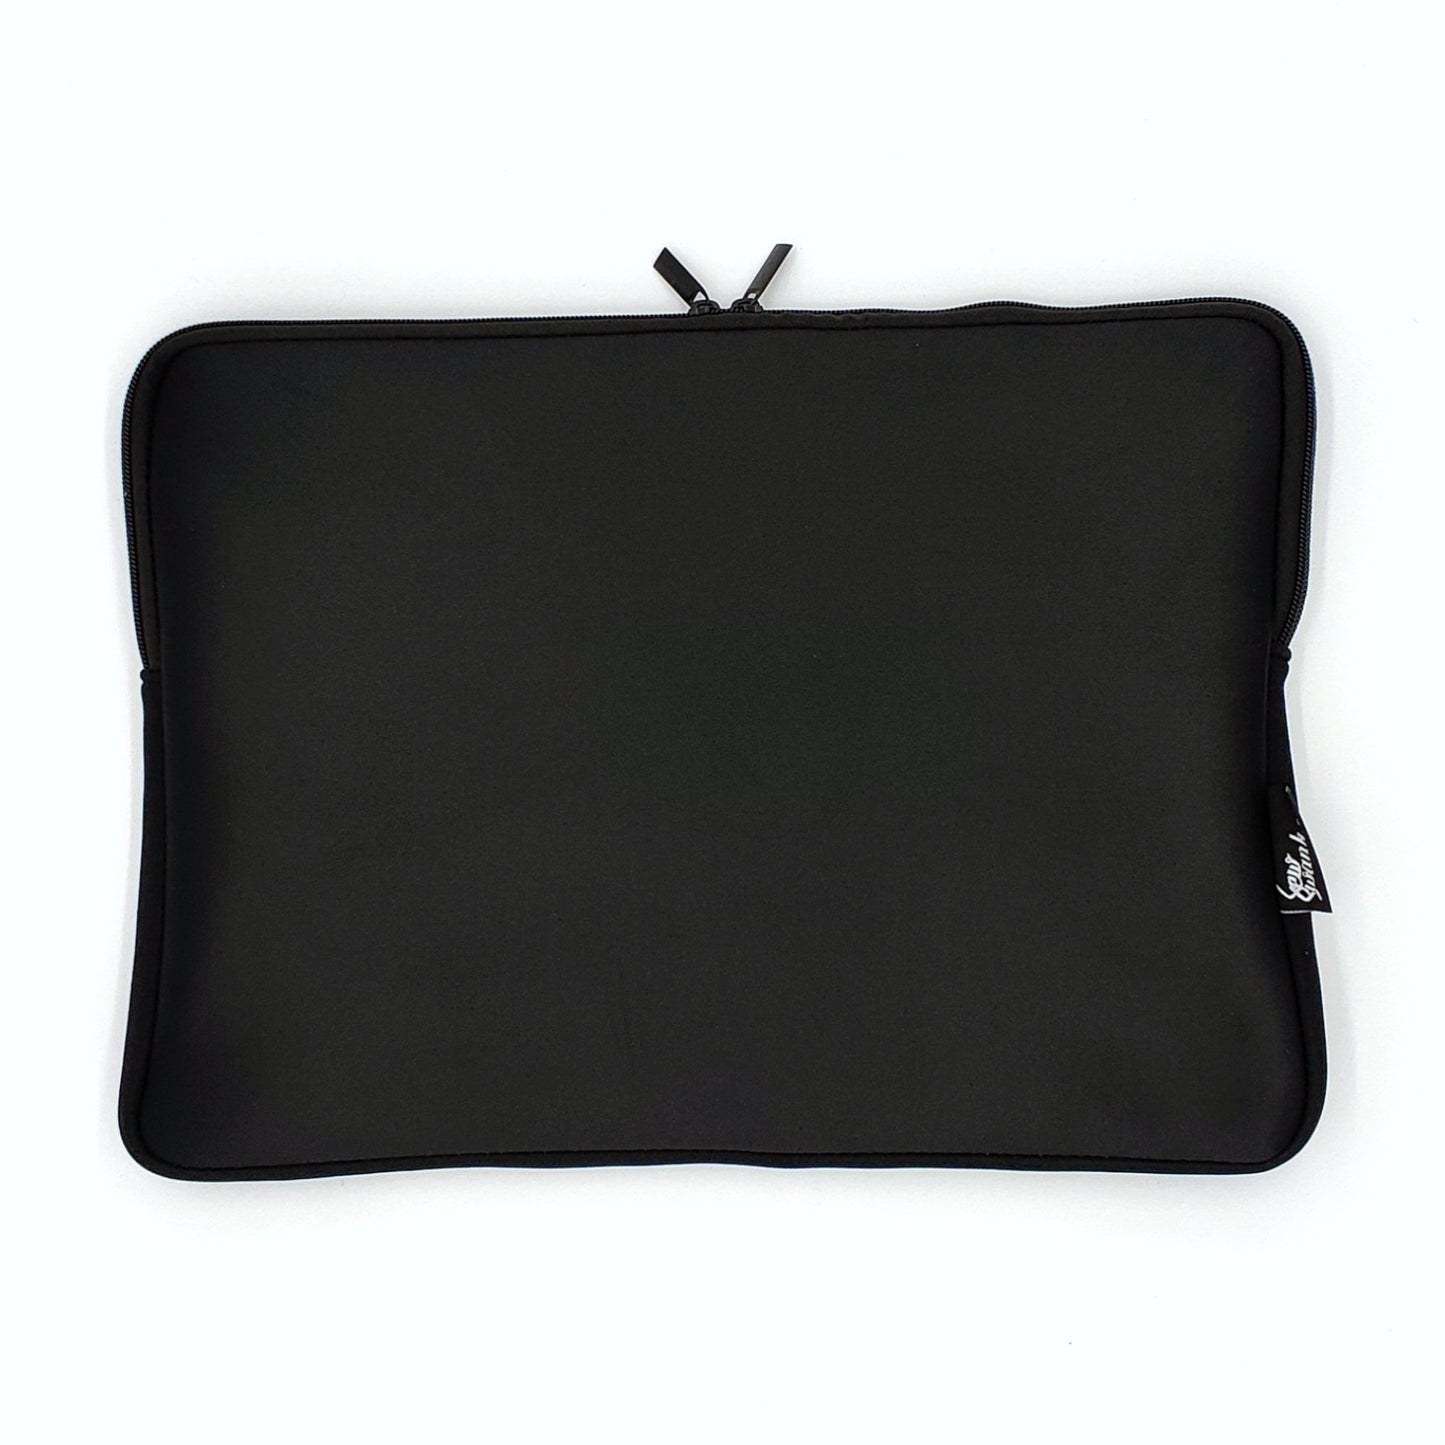 13-15 Inch Solid Black Laptop Sleeve